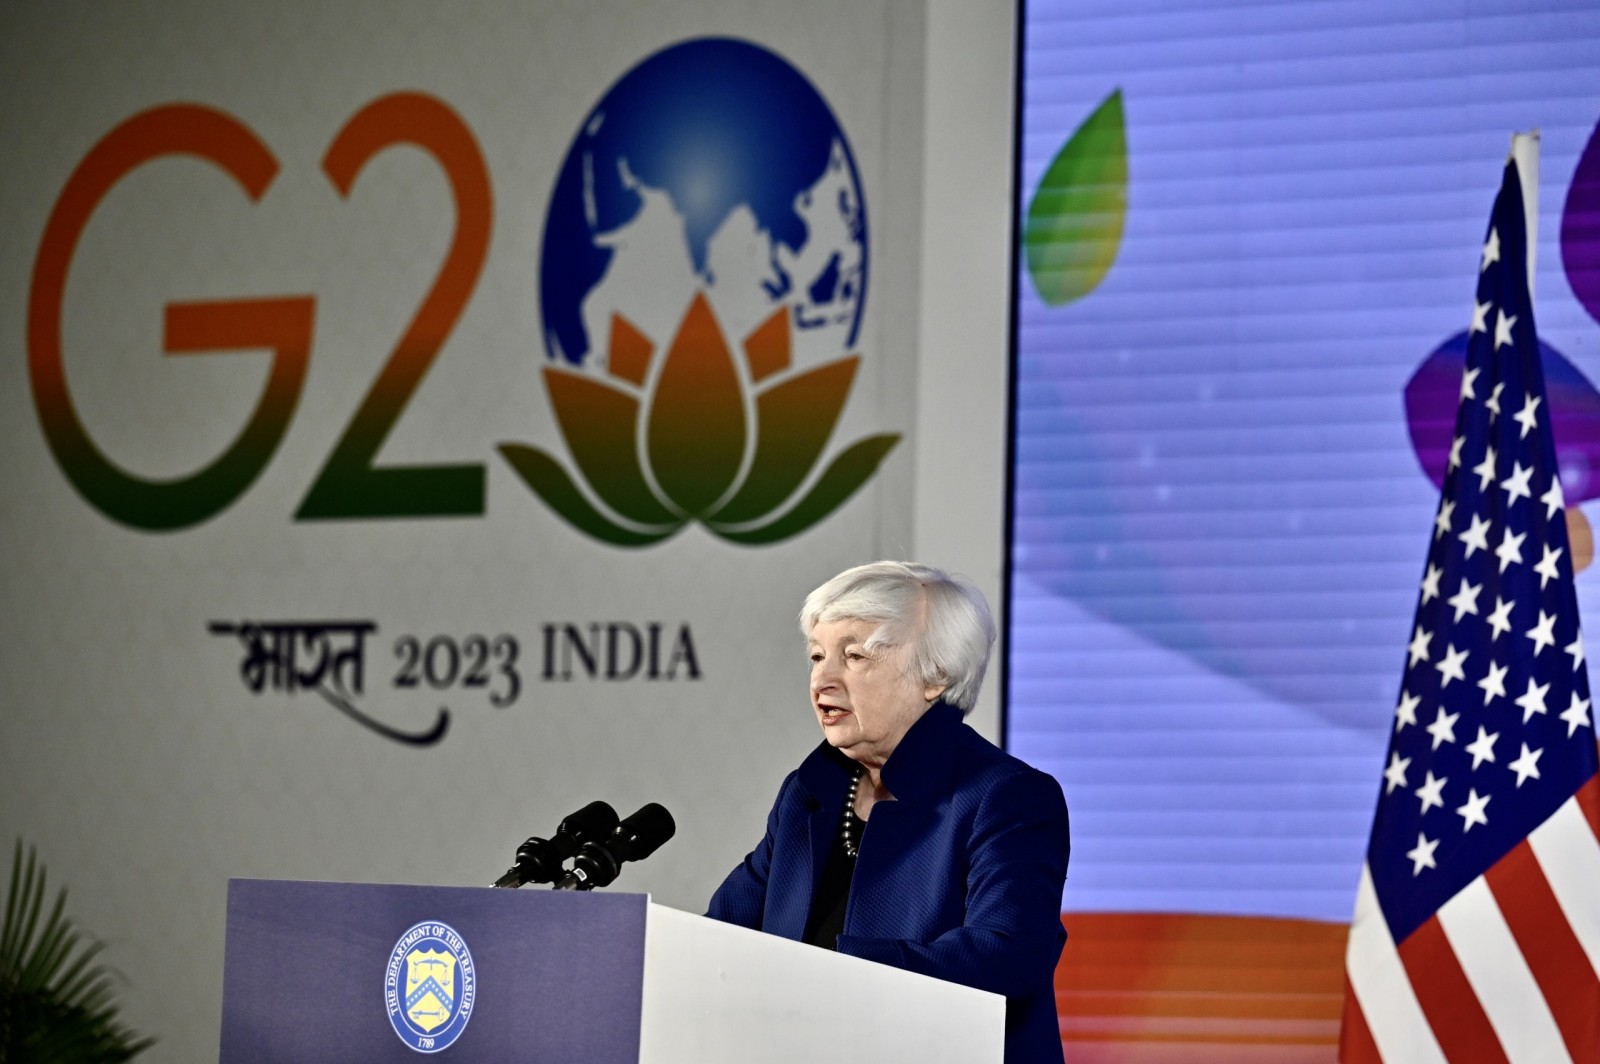 epa10485058 United States Secretary of the Treasury Janet Yellen addresses a press conference during the G20 Finance Ministers and Central Bank Governors (FMCBG) meeting in Bangalore, India, 23 February 2023. Yellen was set to discuss the resilience of the US and global economy in the face of headwinds including Russia's invasion of Ukraine and highlight key priorities for the Treasury during the G20, her office informed.  EPA/JAGADEESH NV